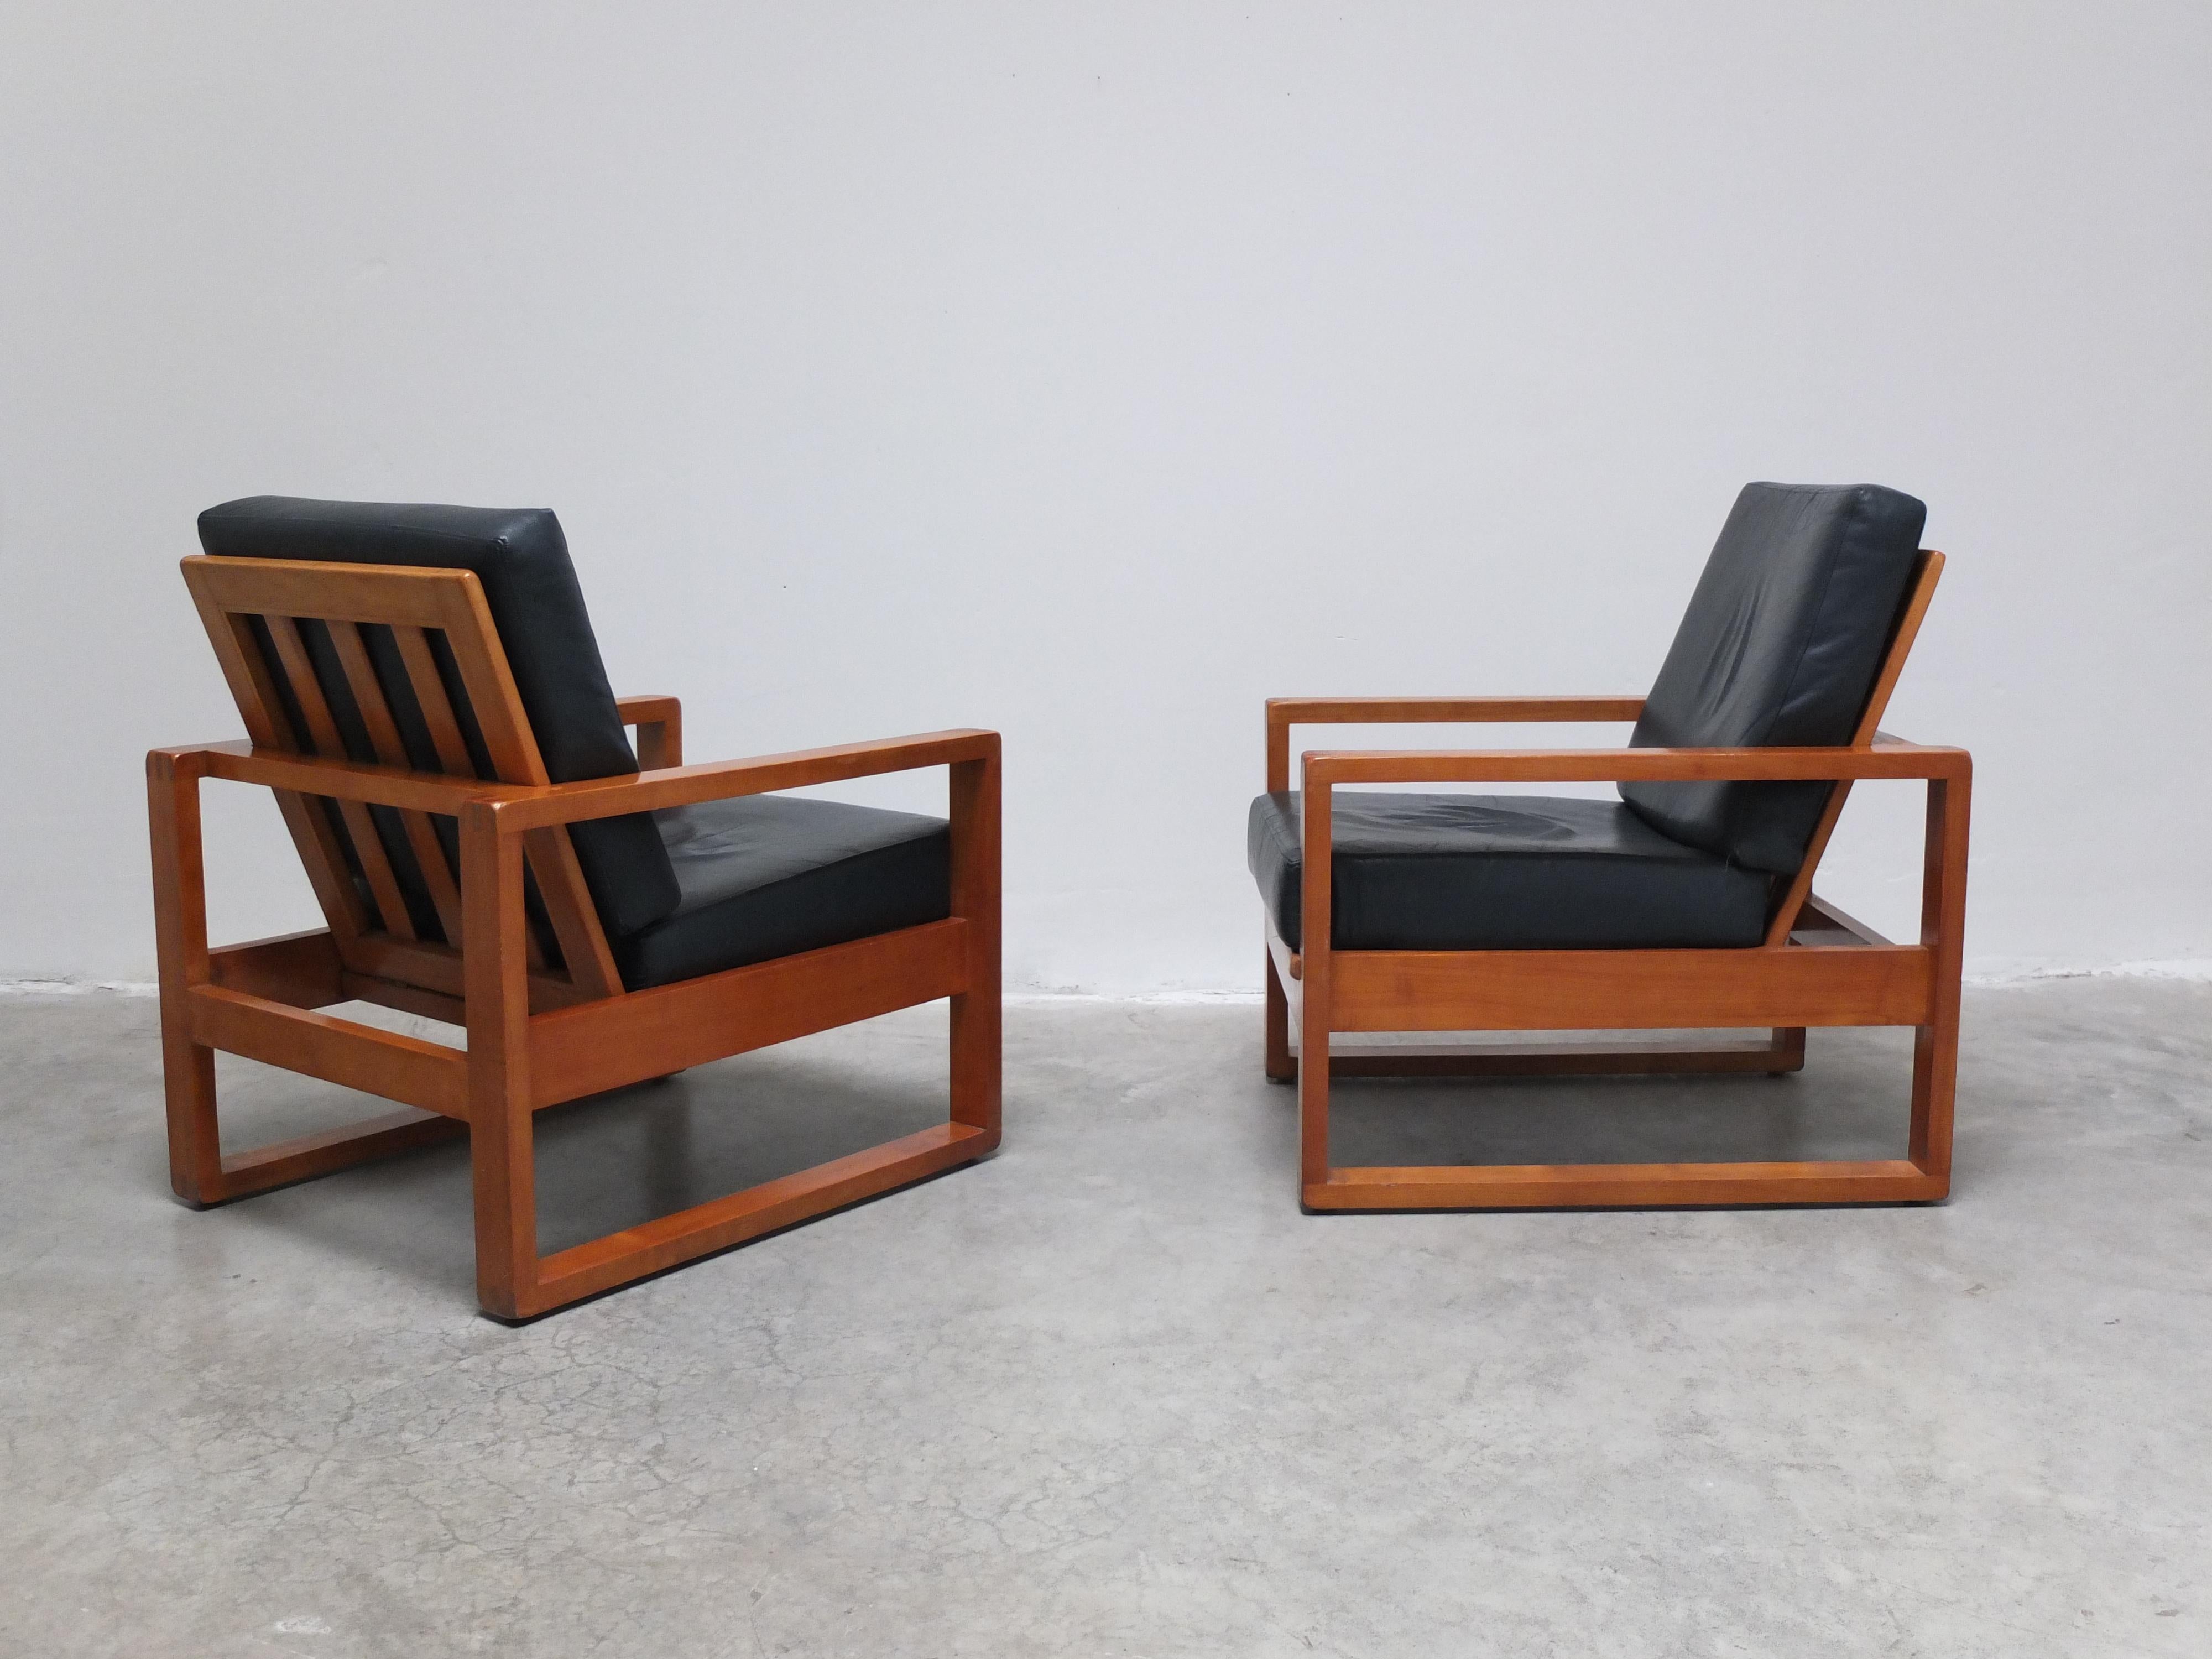 Unique Pair of Modernist Lounge Chairs by Van Den Berghe-Pauvers, 1960s For Sale 2